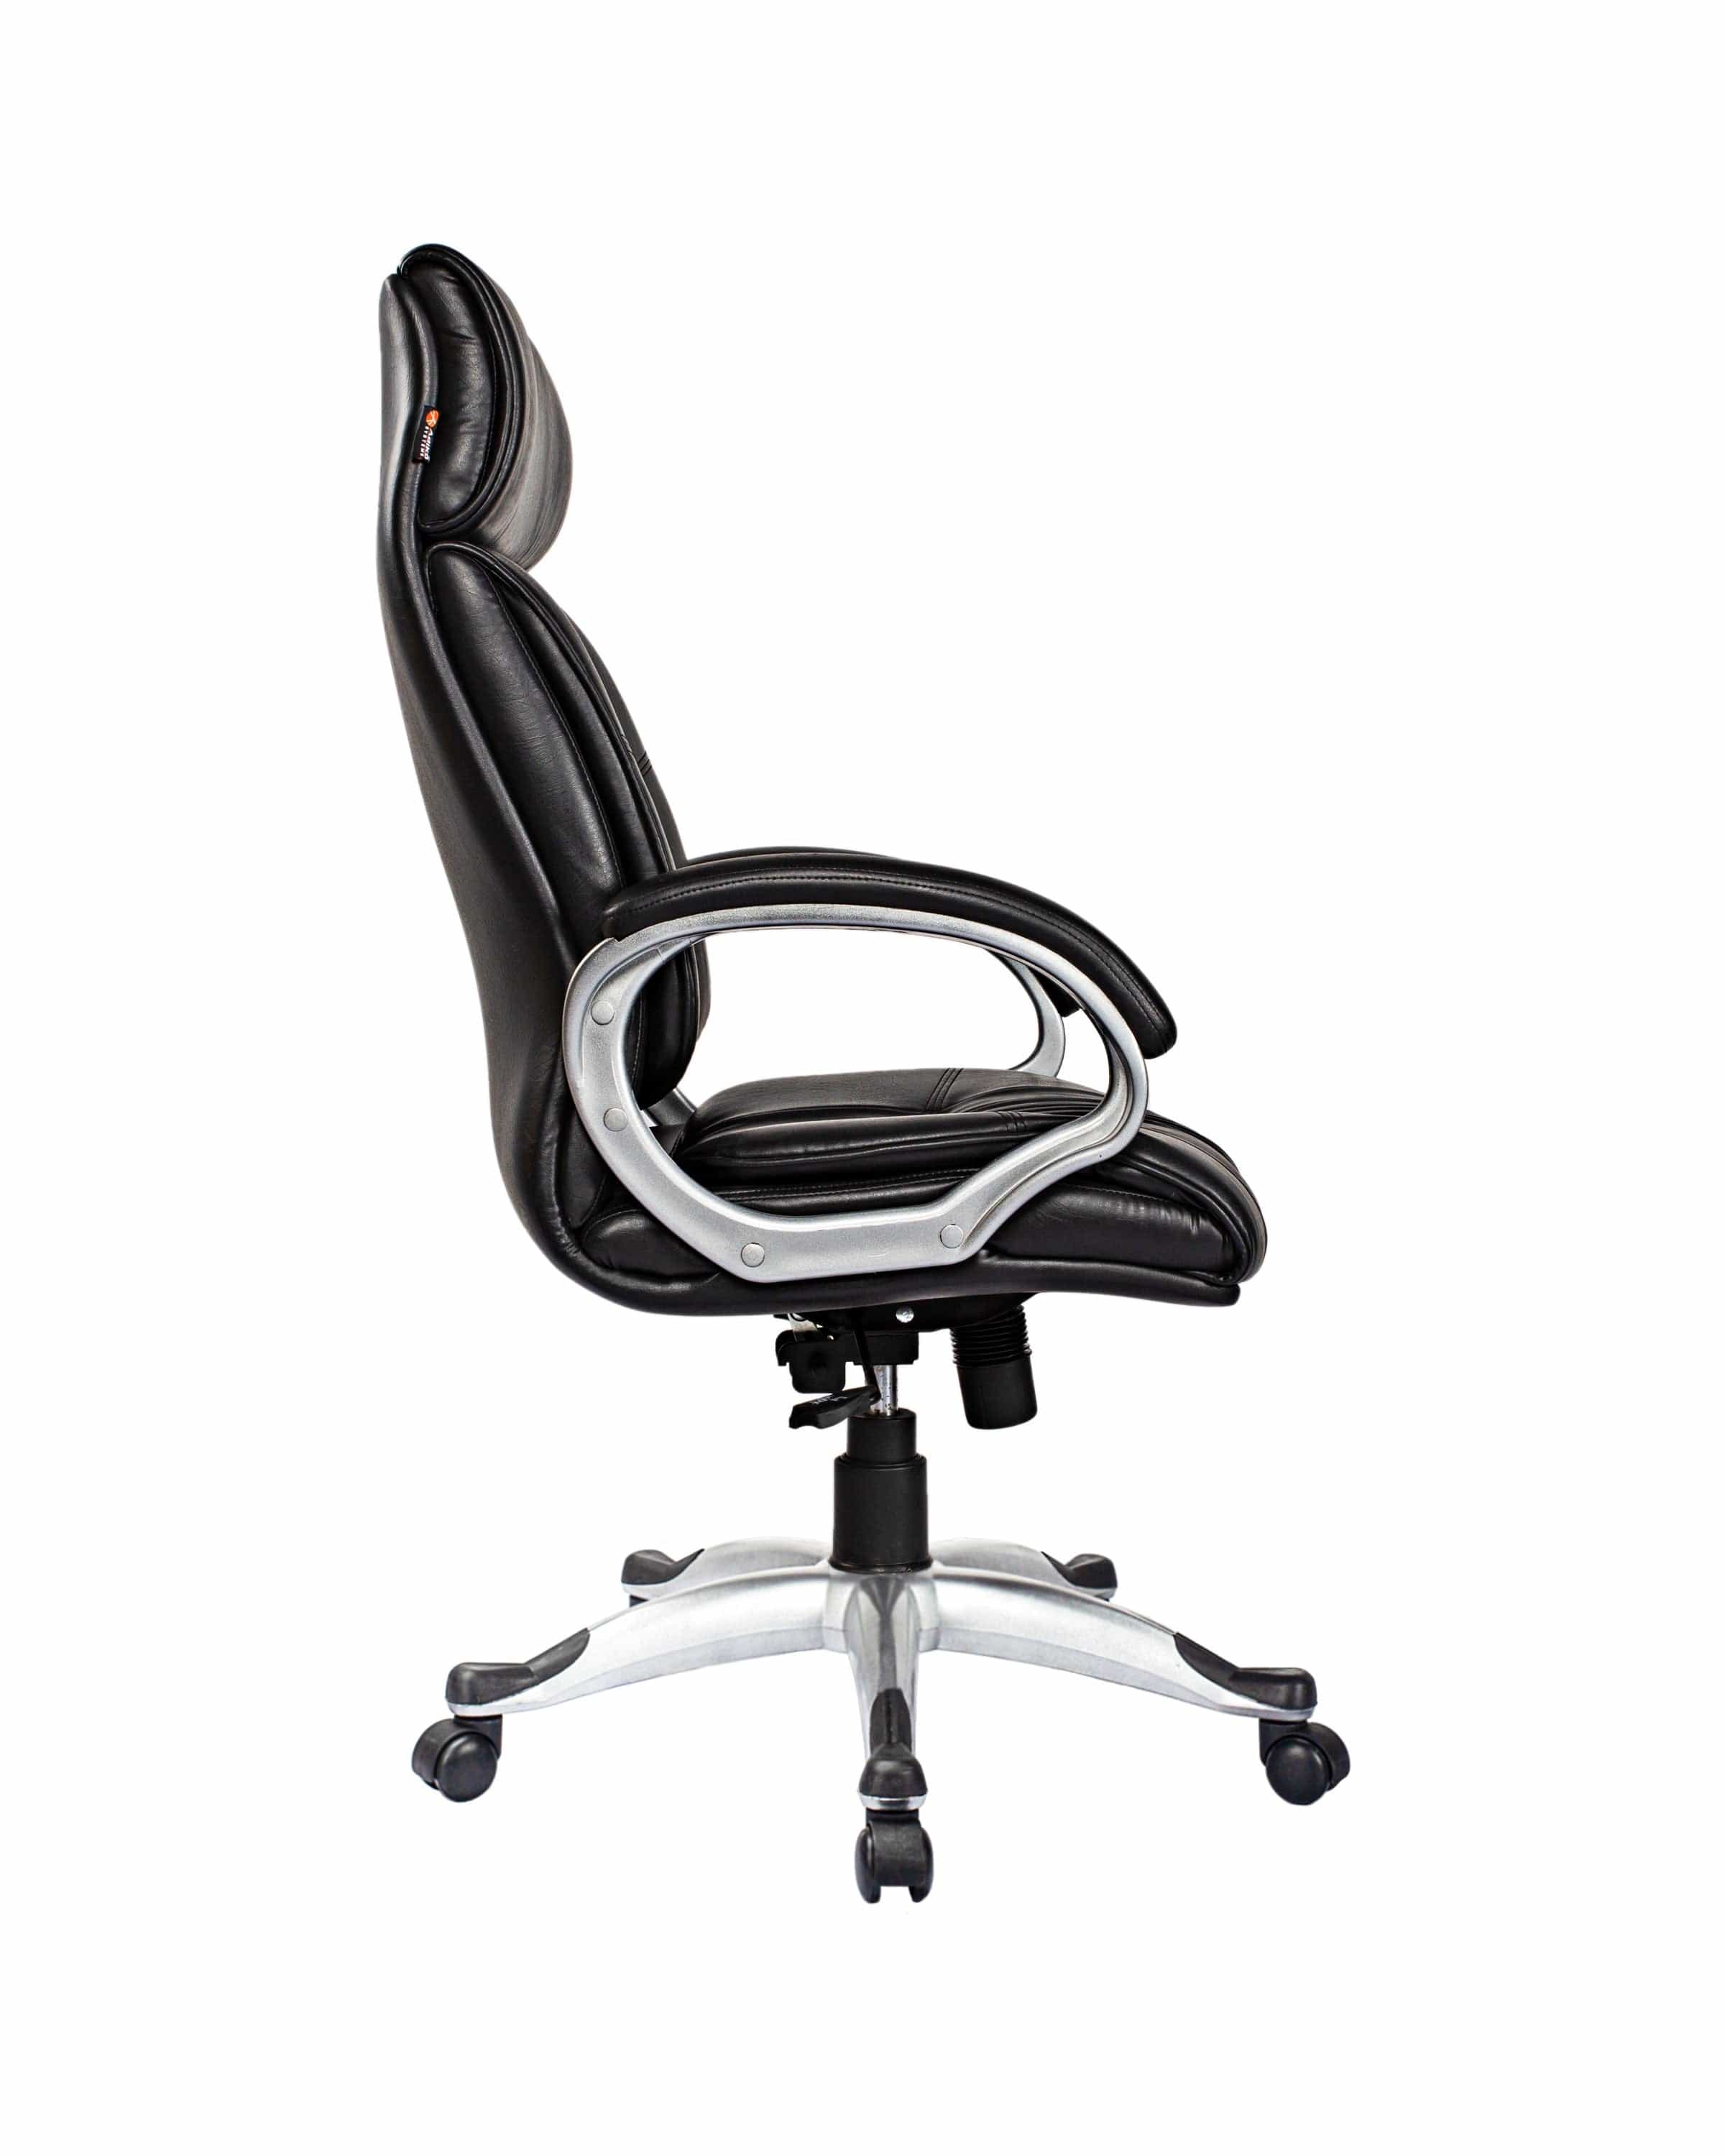 Adiko High Back Exceutive Chair in Black